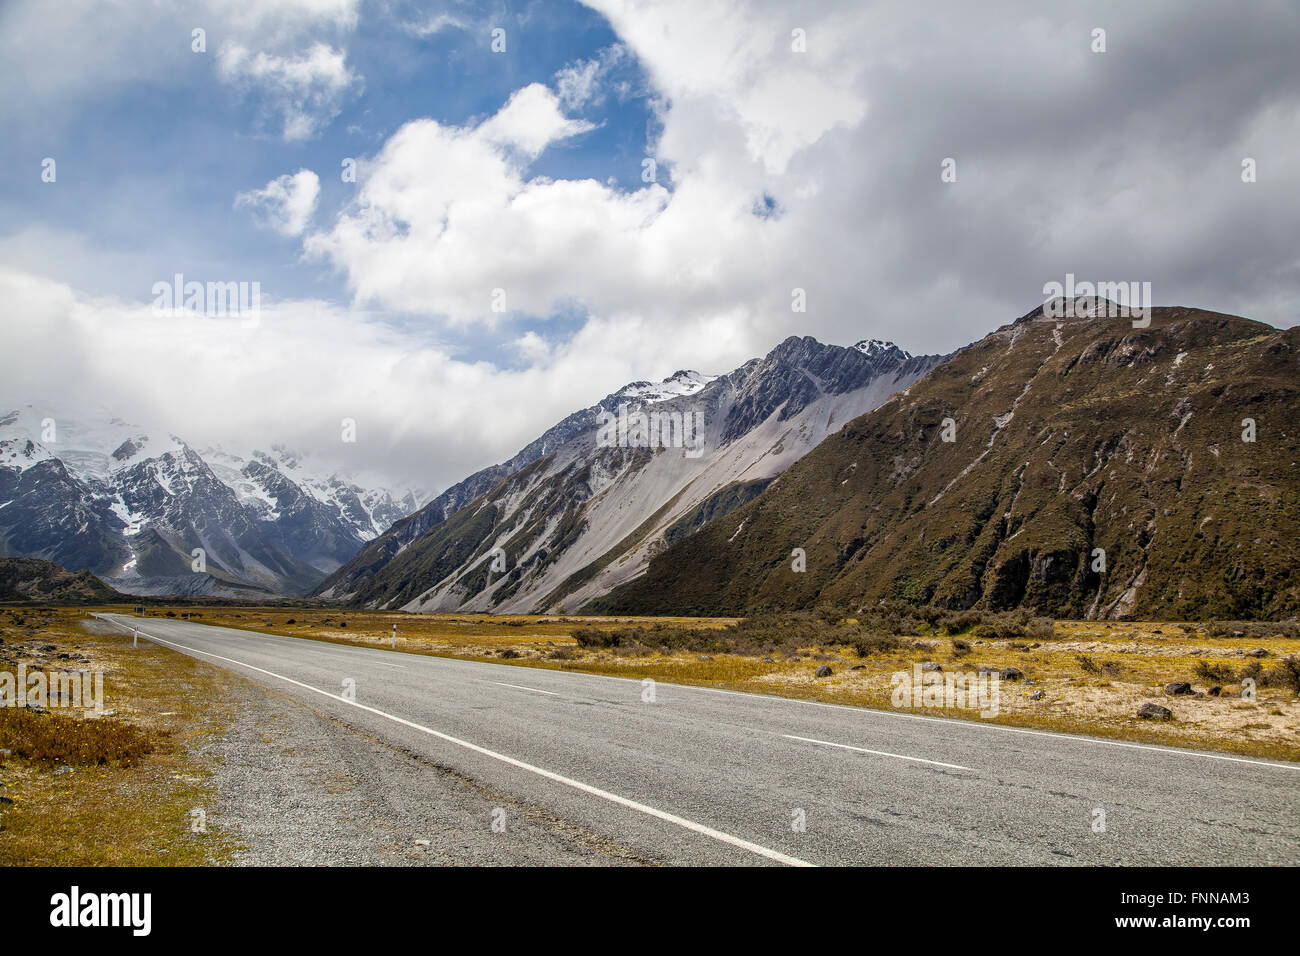 Mountains in Mount Cook National Park New Zealand Stock Photo